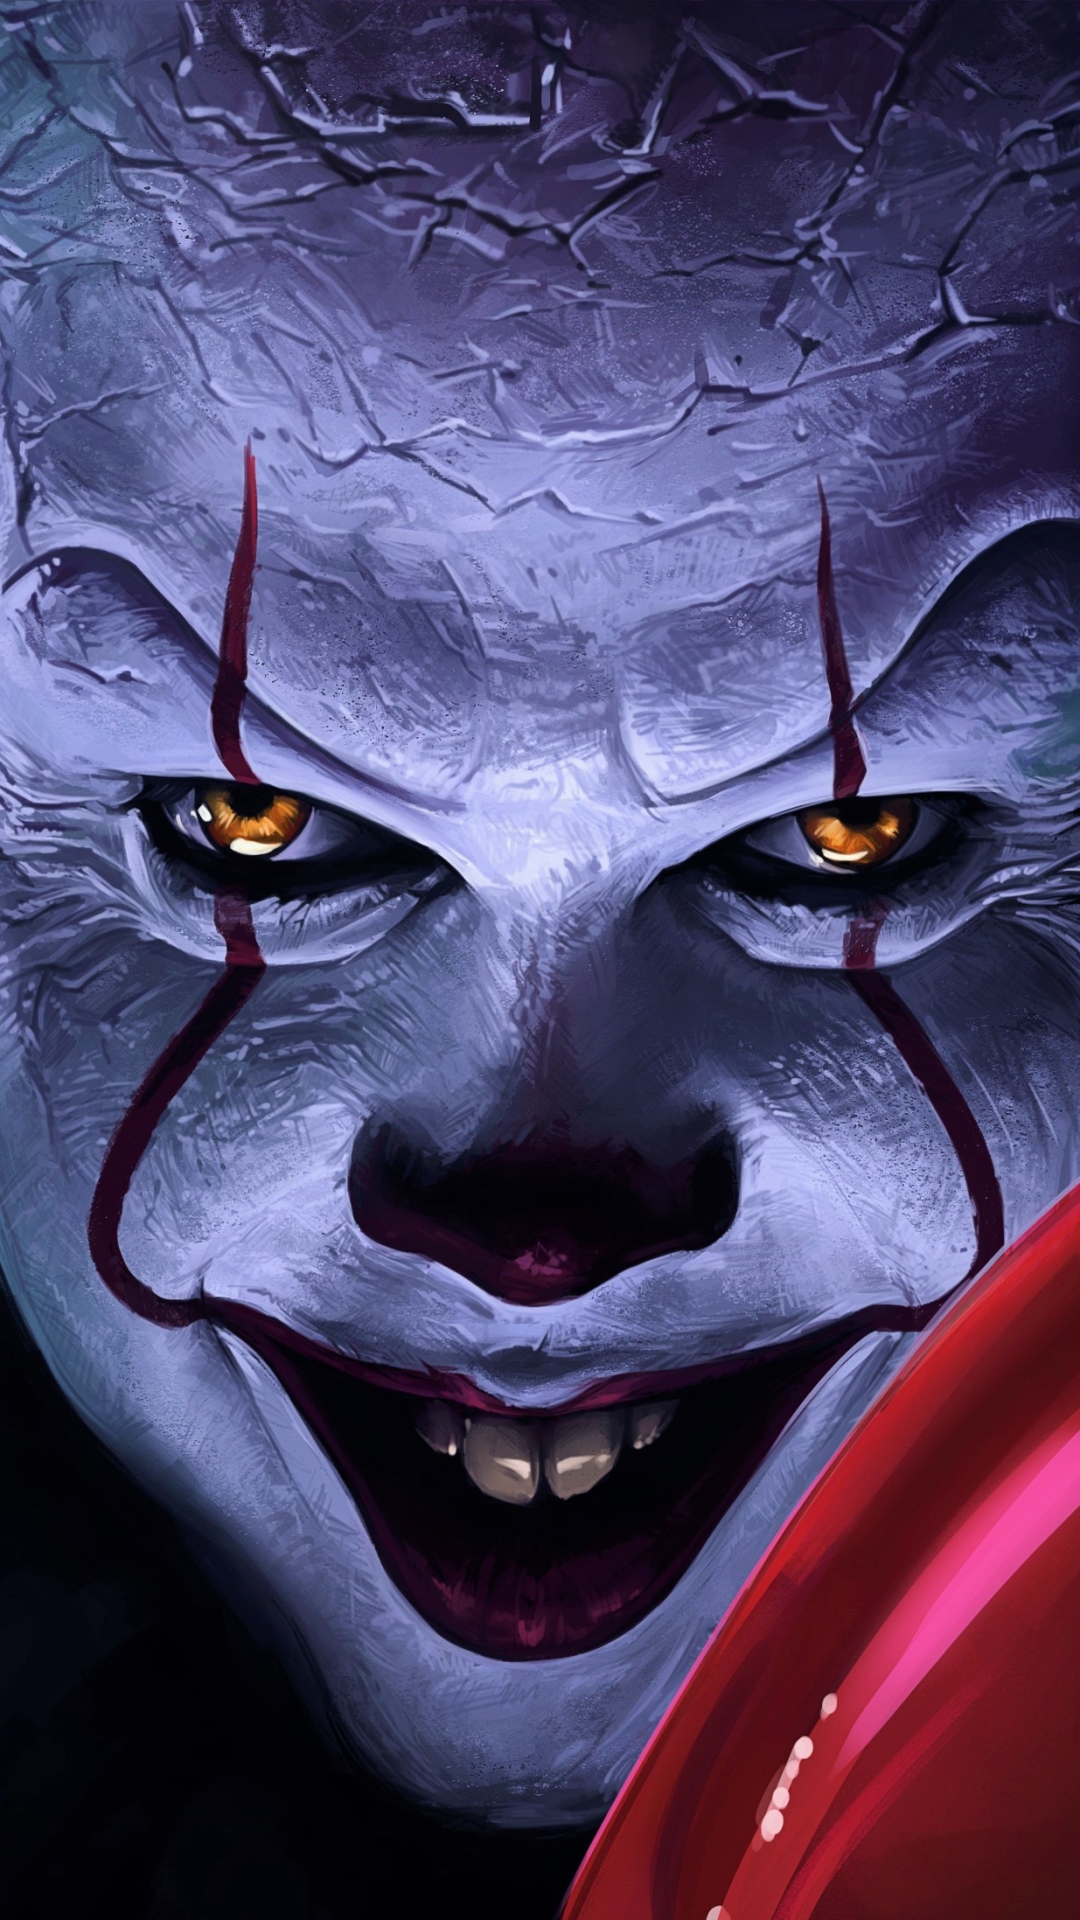 100+] Pennywise Wallpapers | Wallpapers.com